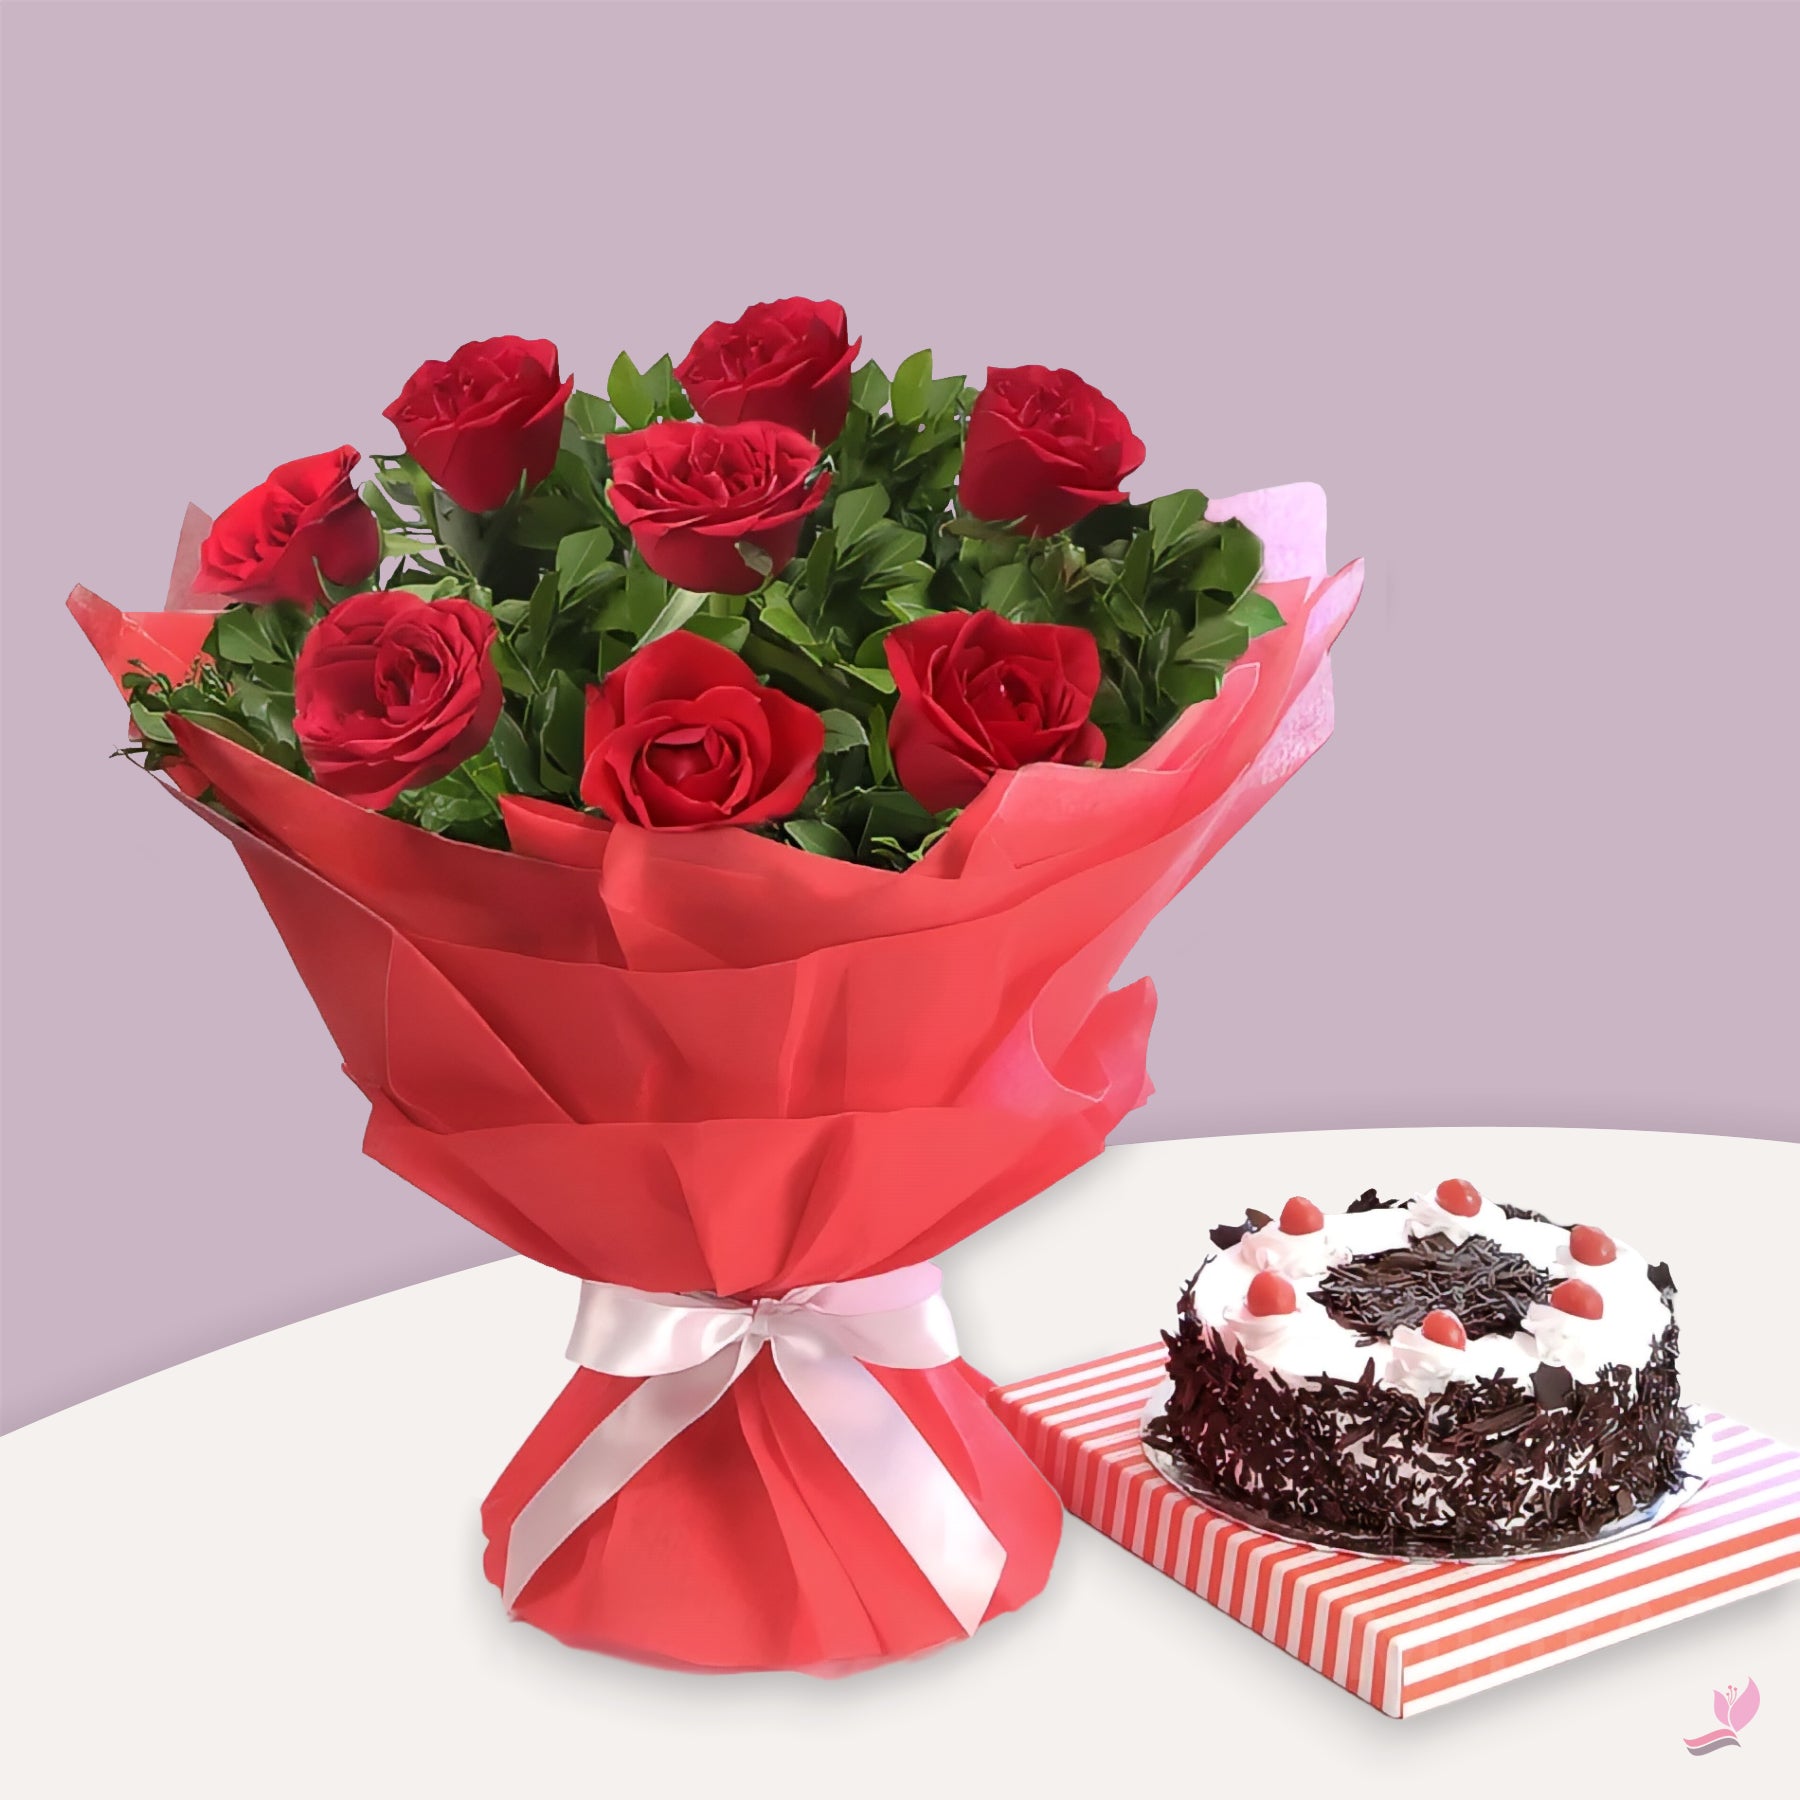 Red Roses Cake Combo - Arabianblossom - Delicious & Stunning Gift